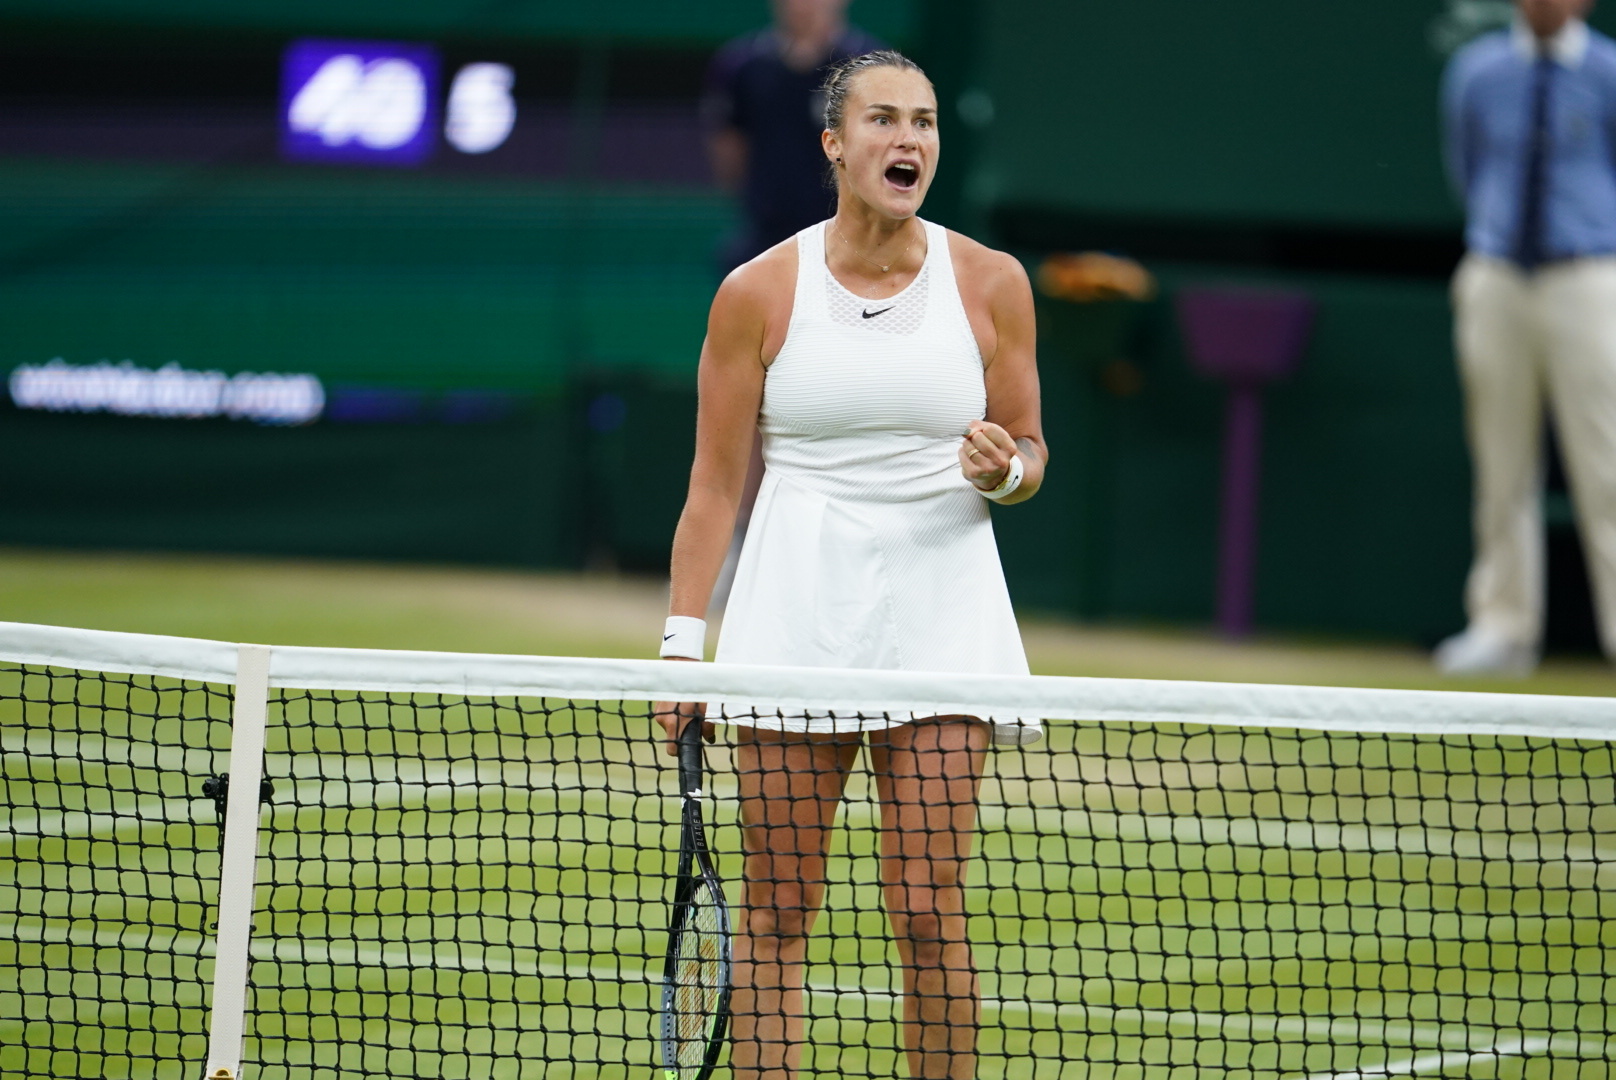 Wimbledon Quarterfinals 2021: Aryna Sabalenka defeats Ons Jabeur to storm into semifinals for first time in her tennis career.